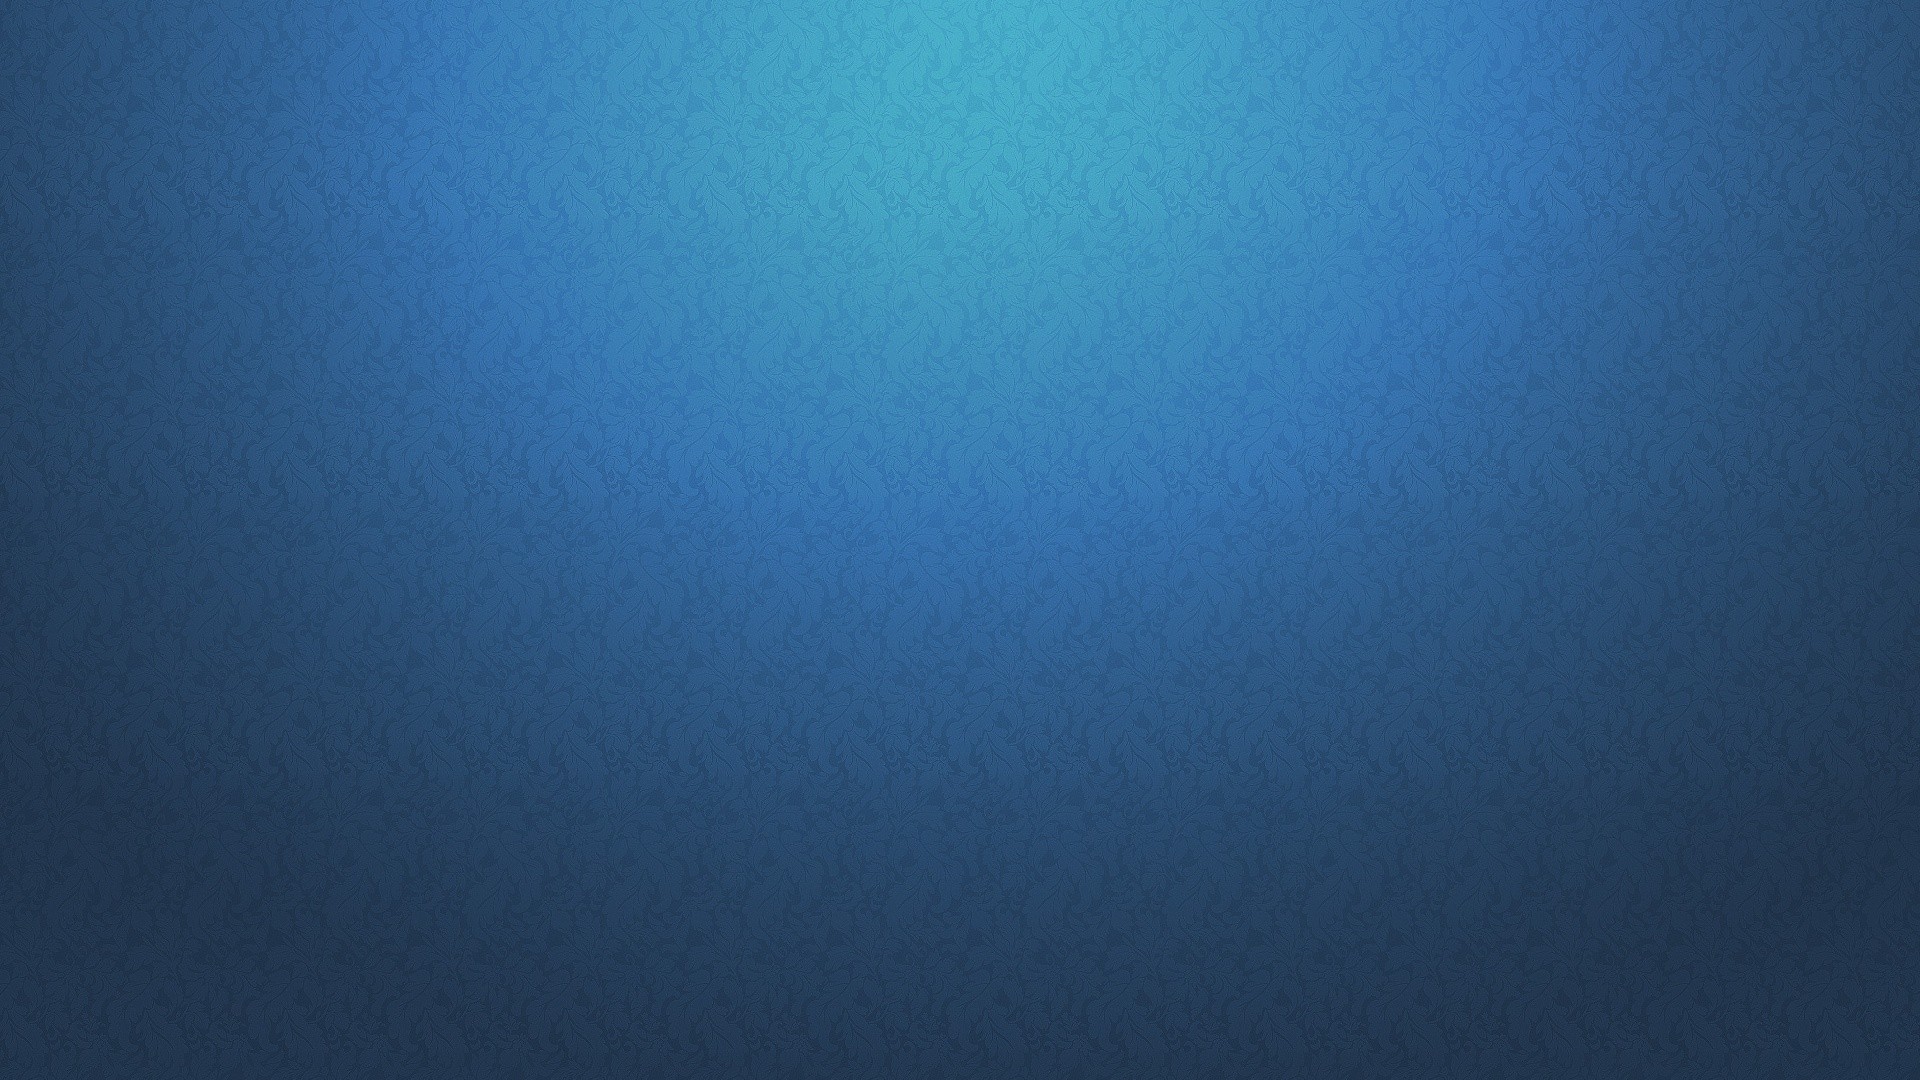 1920x1080  Subtle Blue Pattern. How to set wallpaper on your desktop? Click  the download link from above and set the wallpaper on the desktop from your  OS.